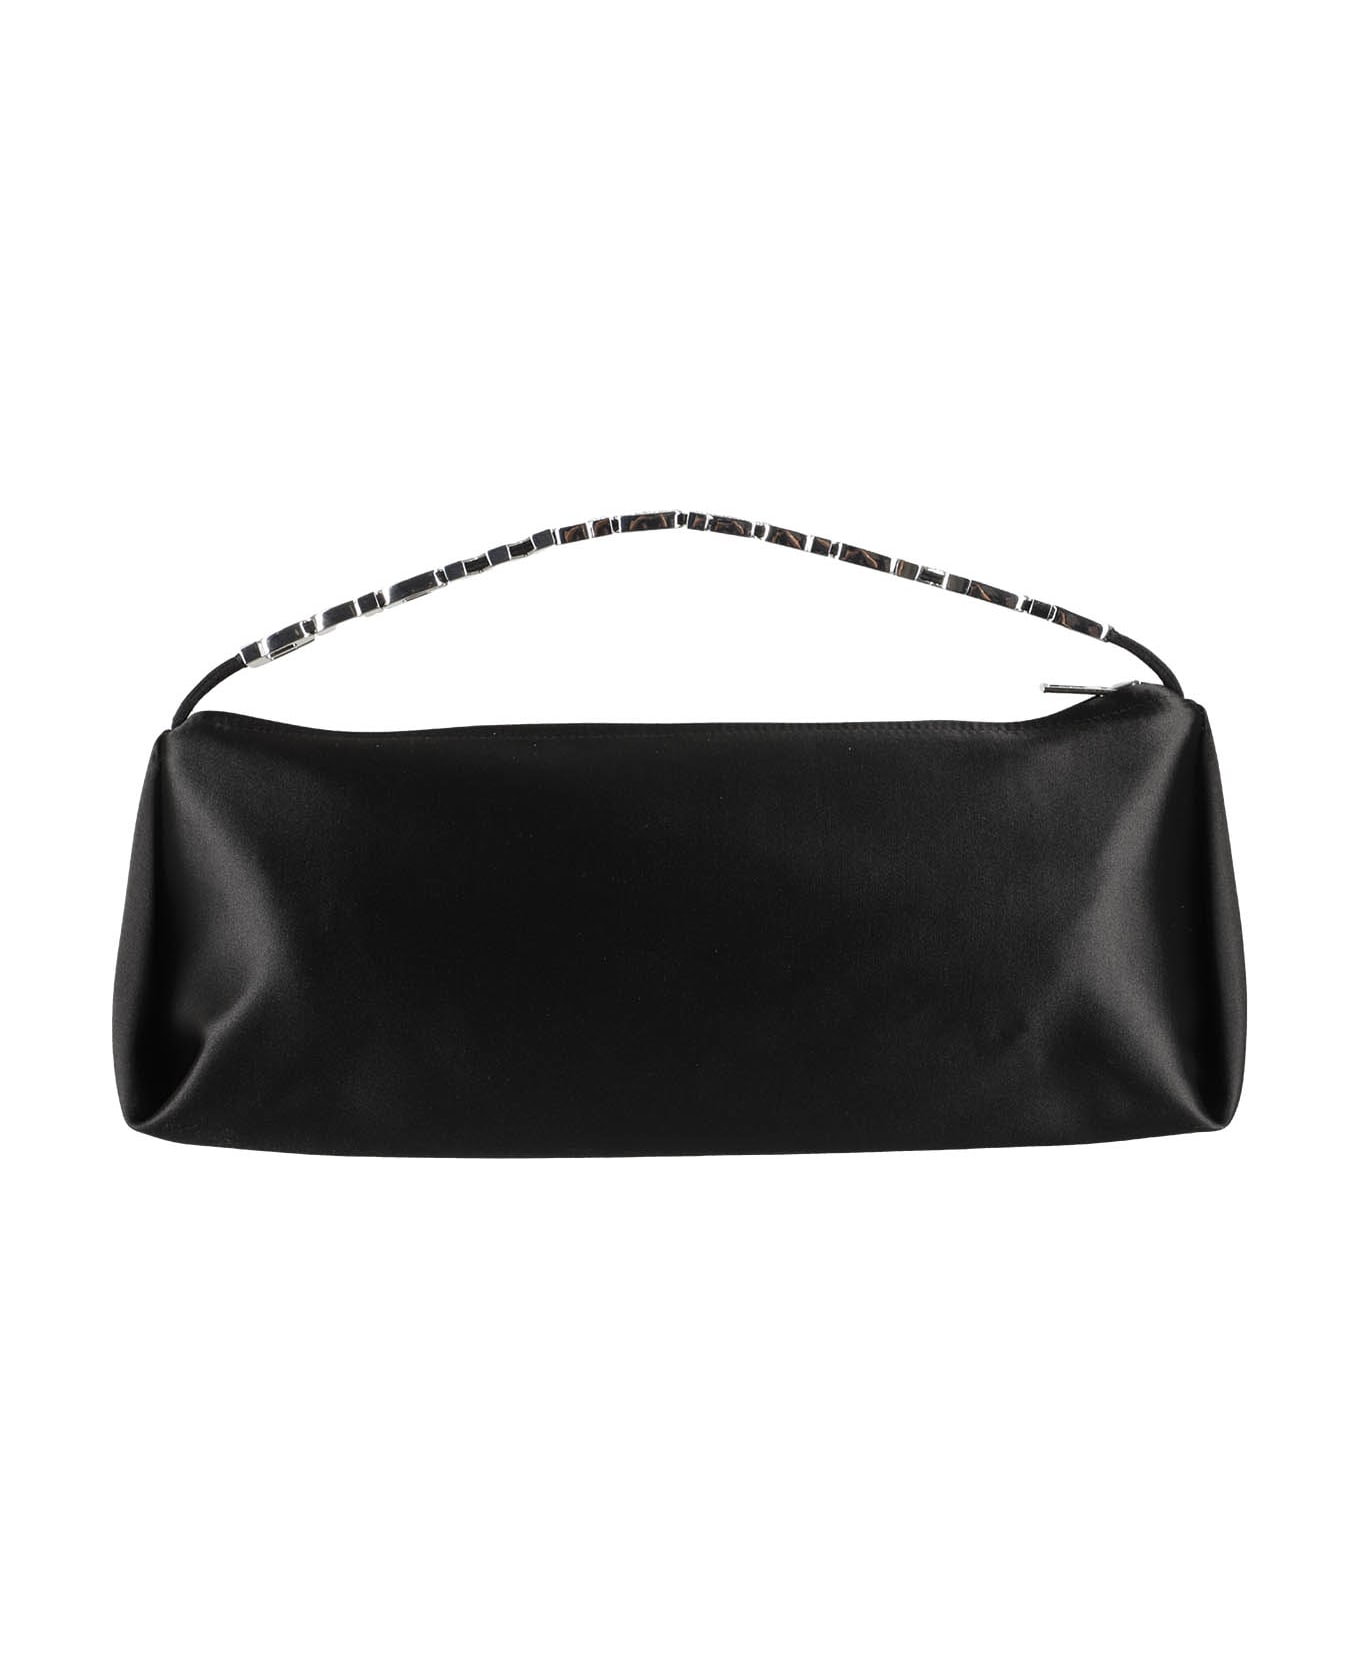 Alexander Wang Marquess Large Stretched Bag